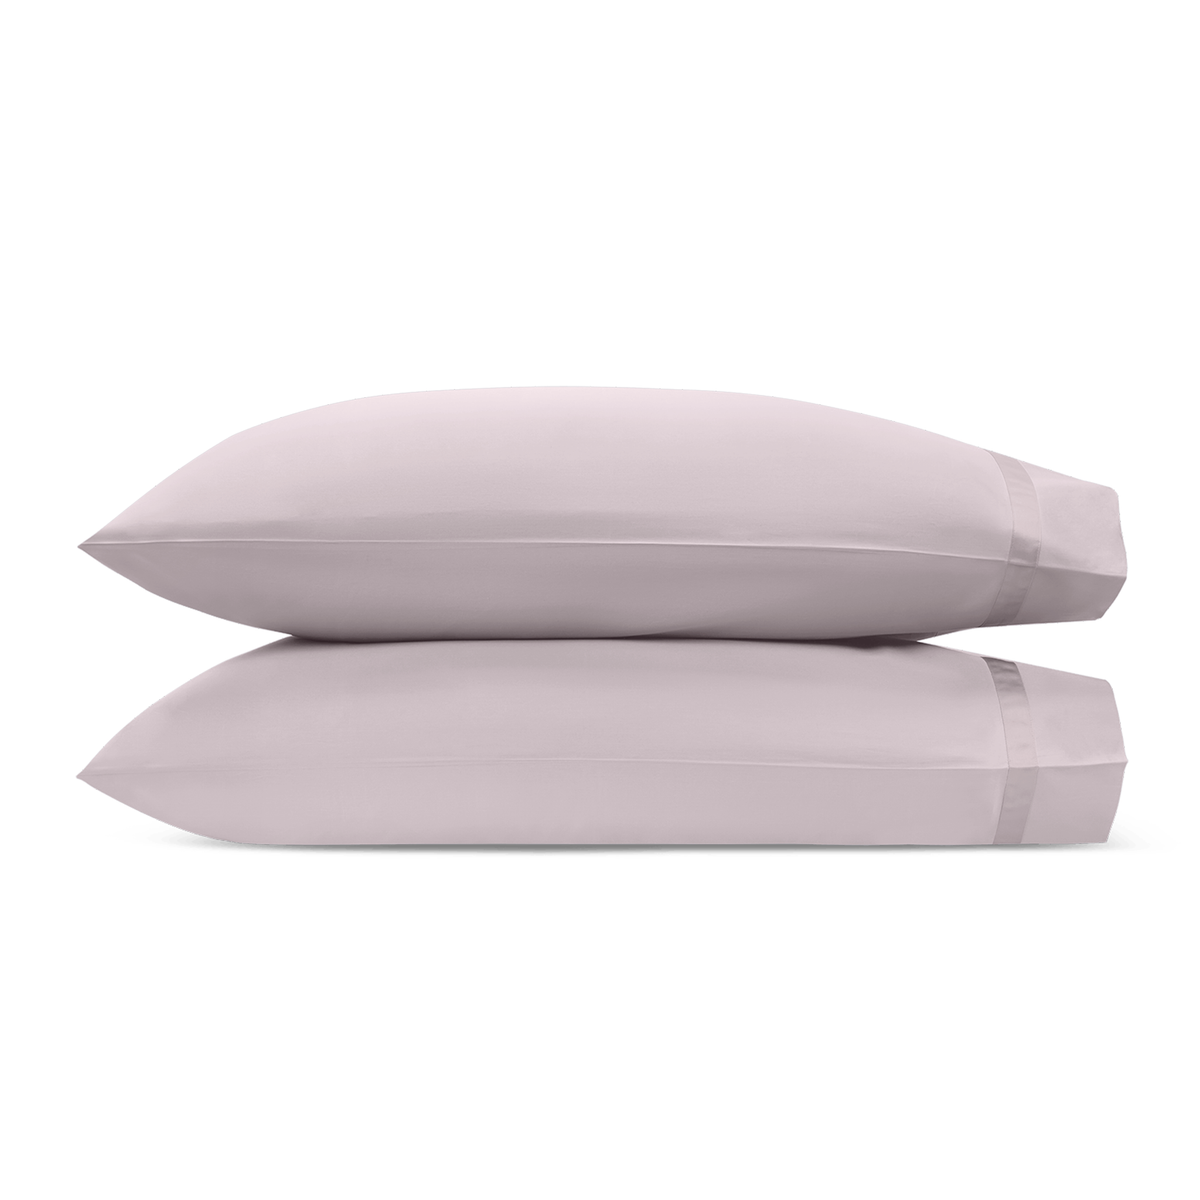 Pair of Pillowcase of Matouk Nocturne Bedding Collection in Color Deep Lilac